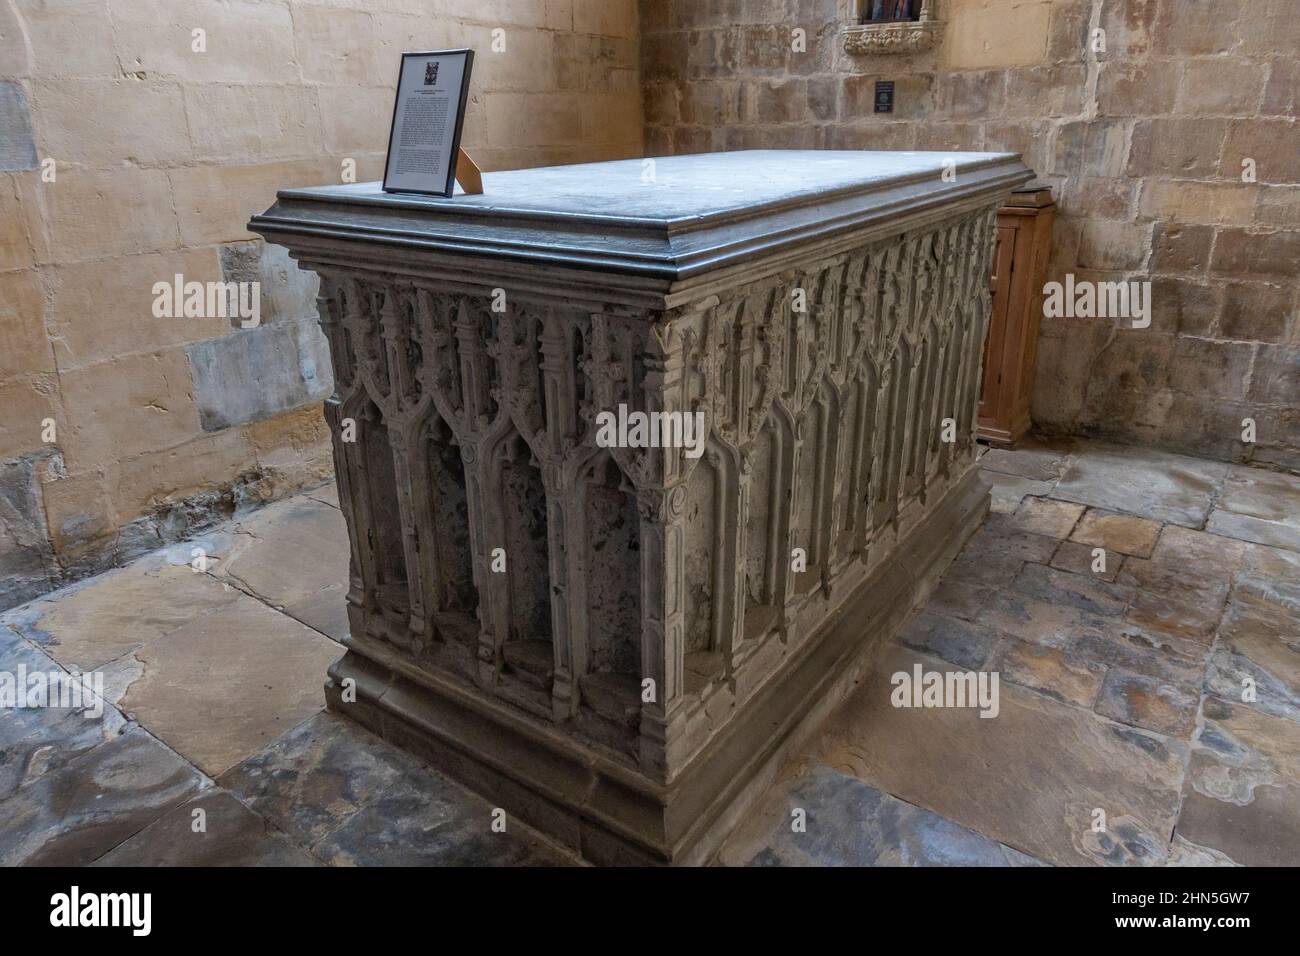 The tomb of Henry Percy, 4th Earl of Northumberland, inside Beverley Minster in Beverley, East Riding of Yorkshire,UK. Stock Photo